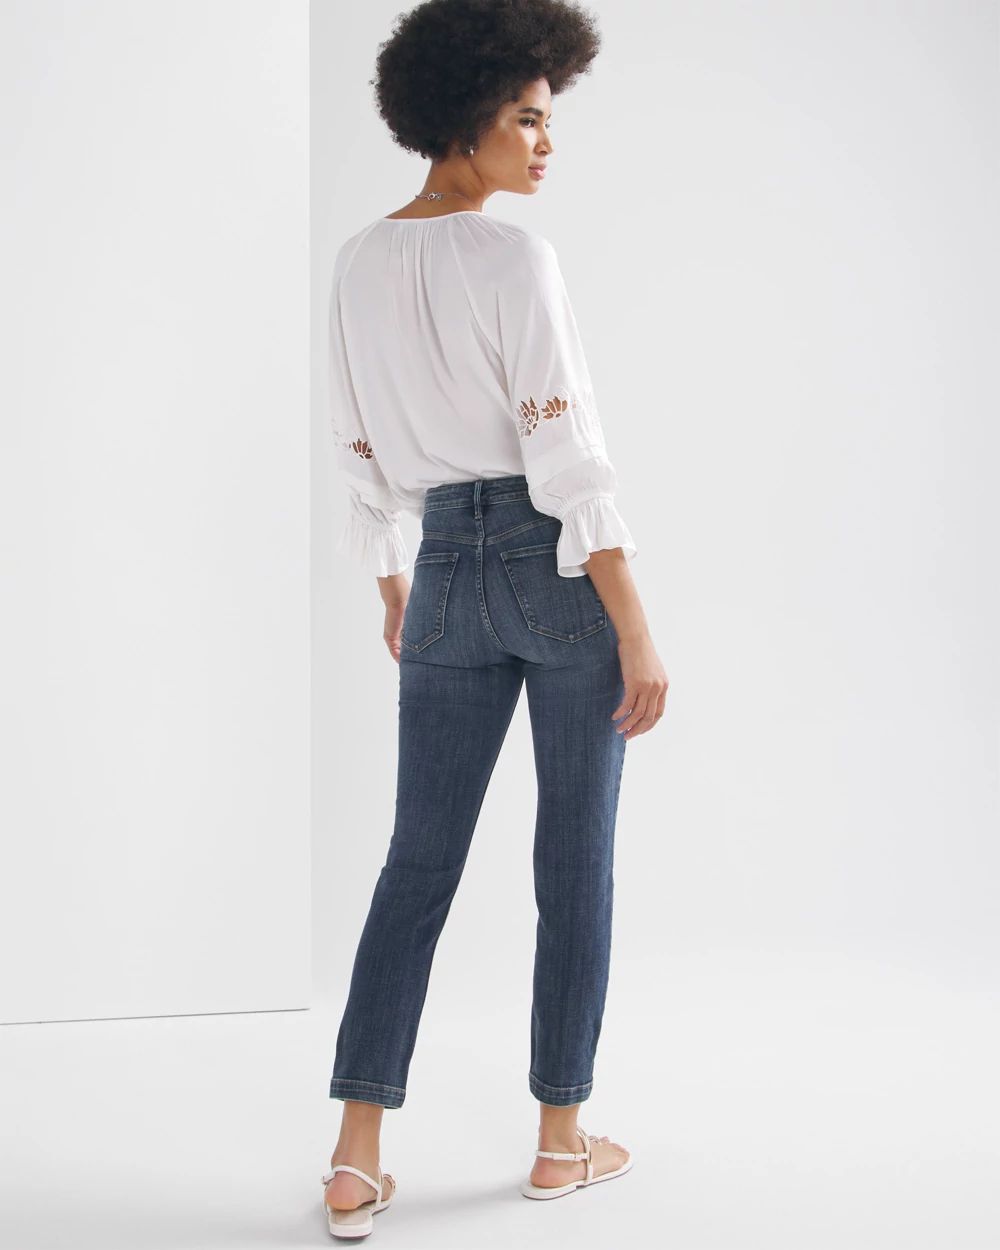 High-Rise Everyday Soft Turnlock Slim Crop Jeans click to view larger image.